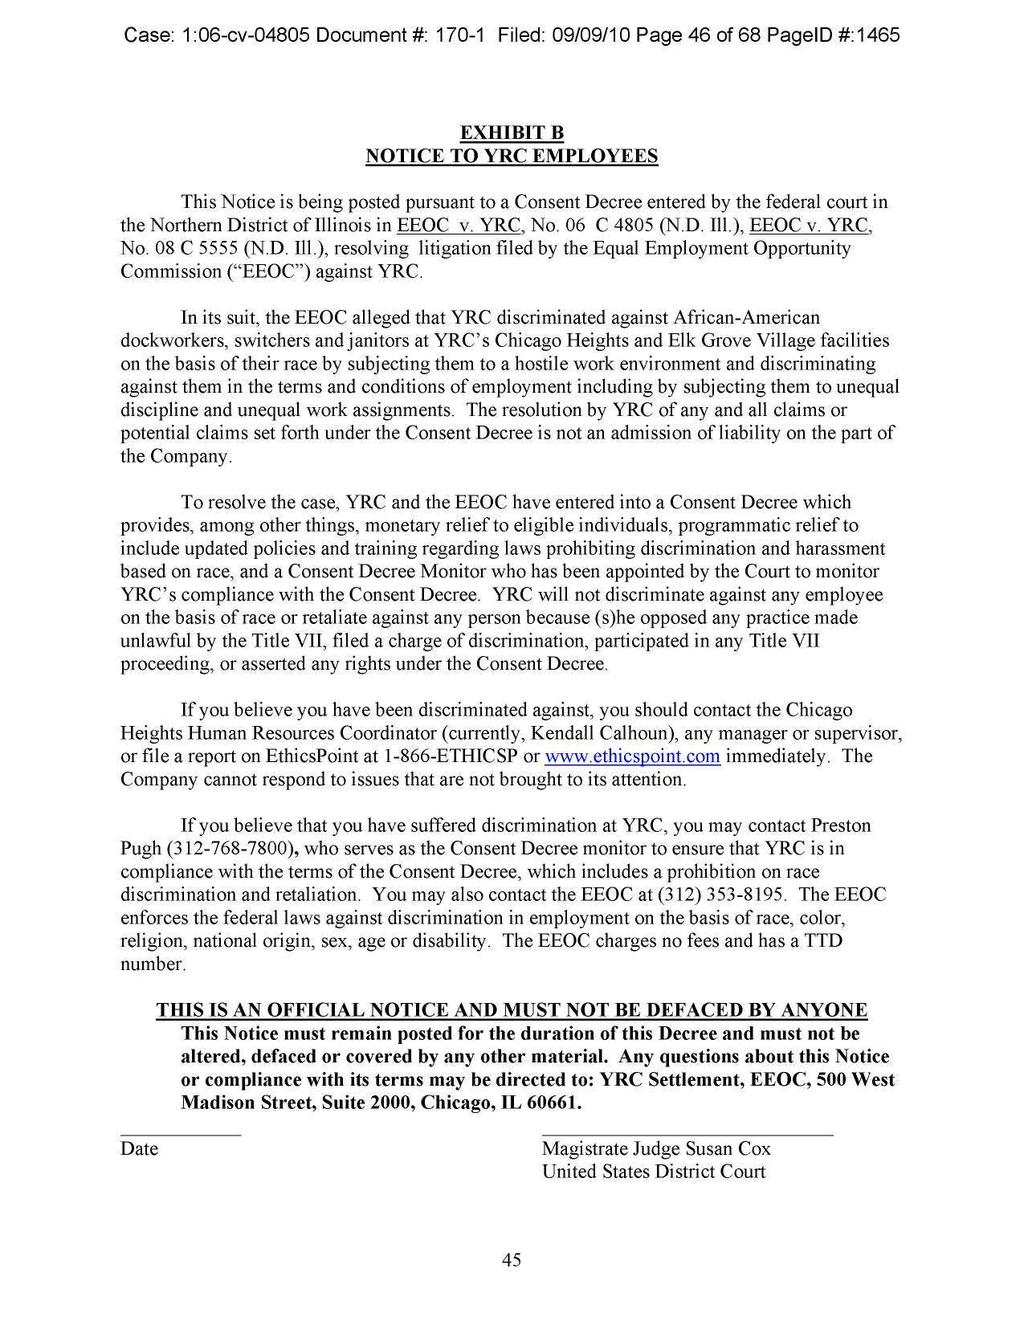 Case: 1:06-cv-04805 Document #: 170-1 Filed: 09/09/10 Page 46 of 68 PageID #:1465 EXHIBIT B NOTICE TO YRC EMPLOYEES This Notice is being posted pursuant to a Consent Decree entered by the federal